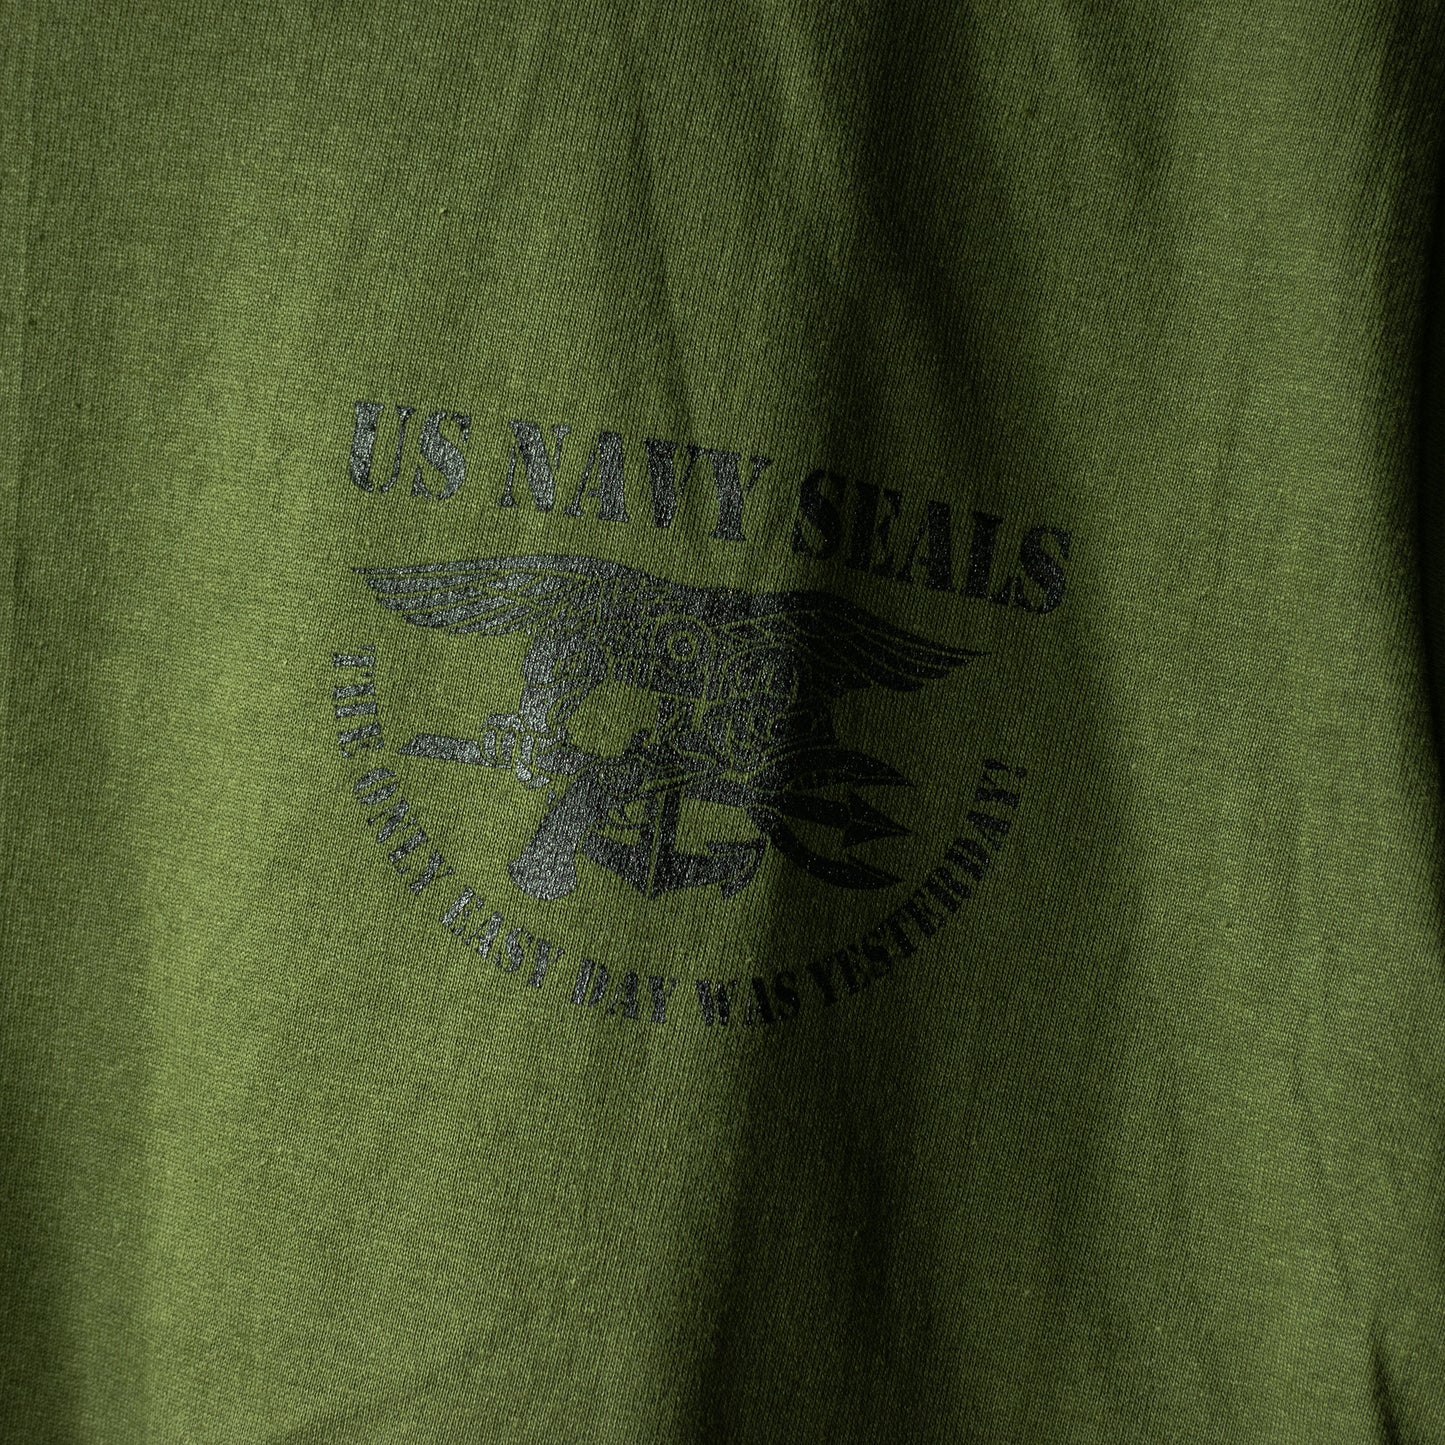 NAVY SEAL feature T-shirt (C71)